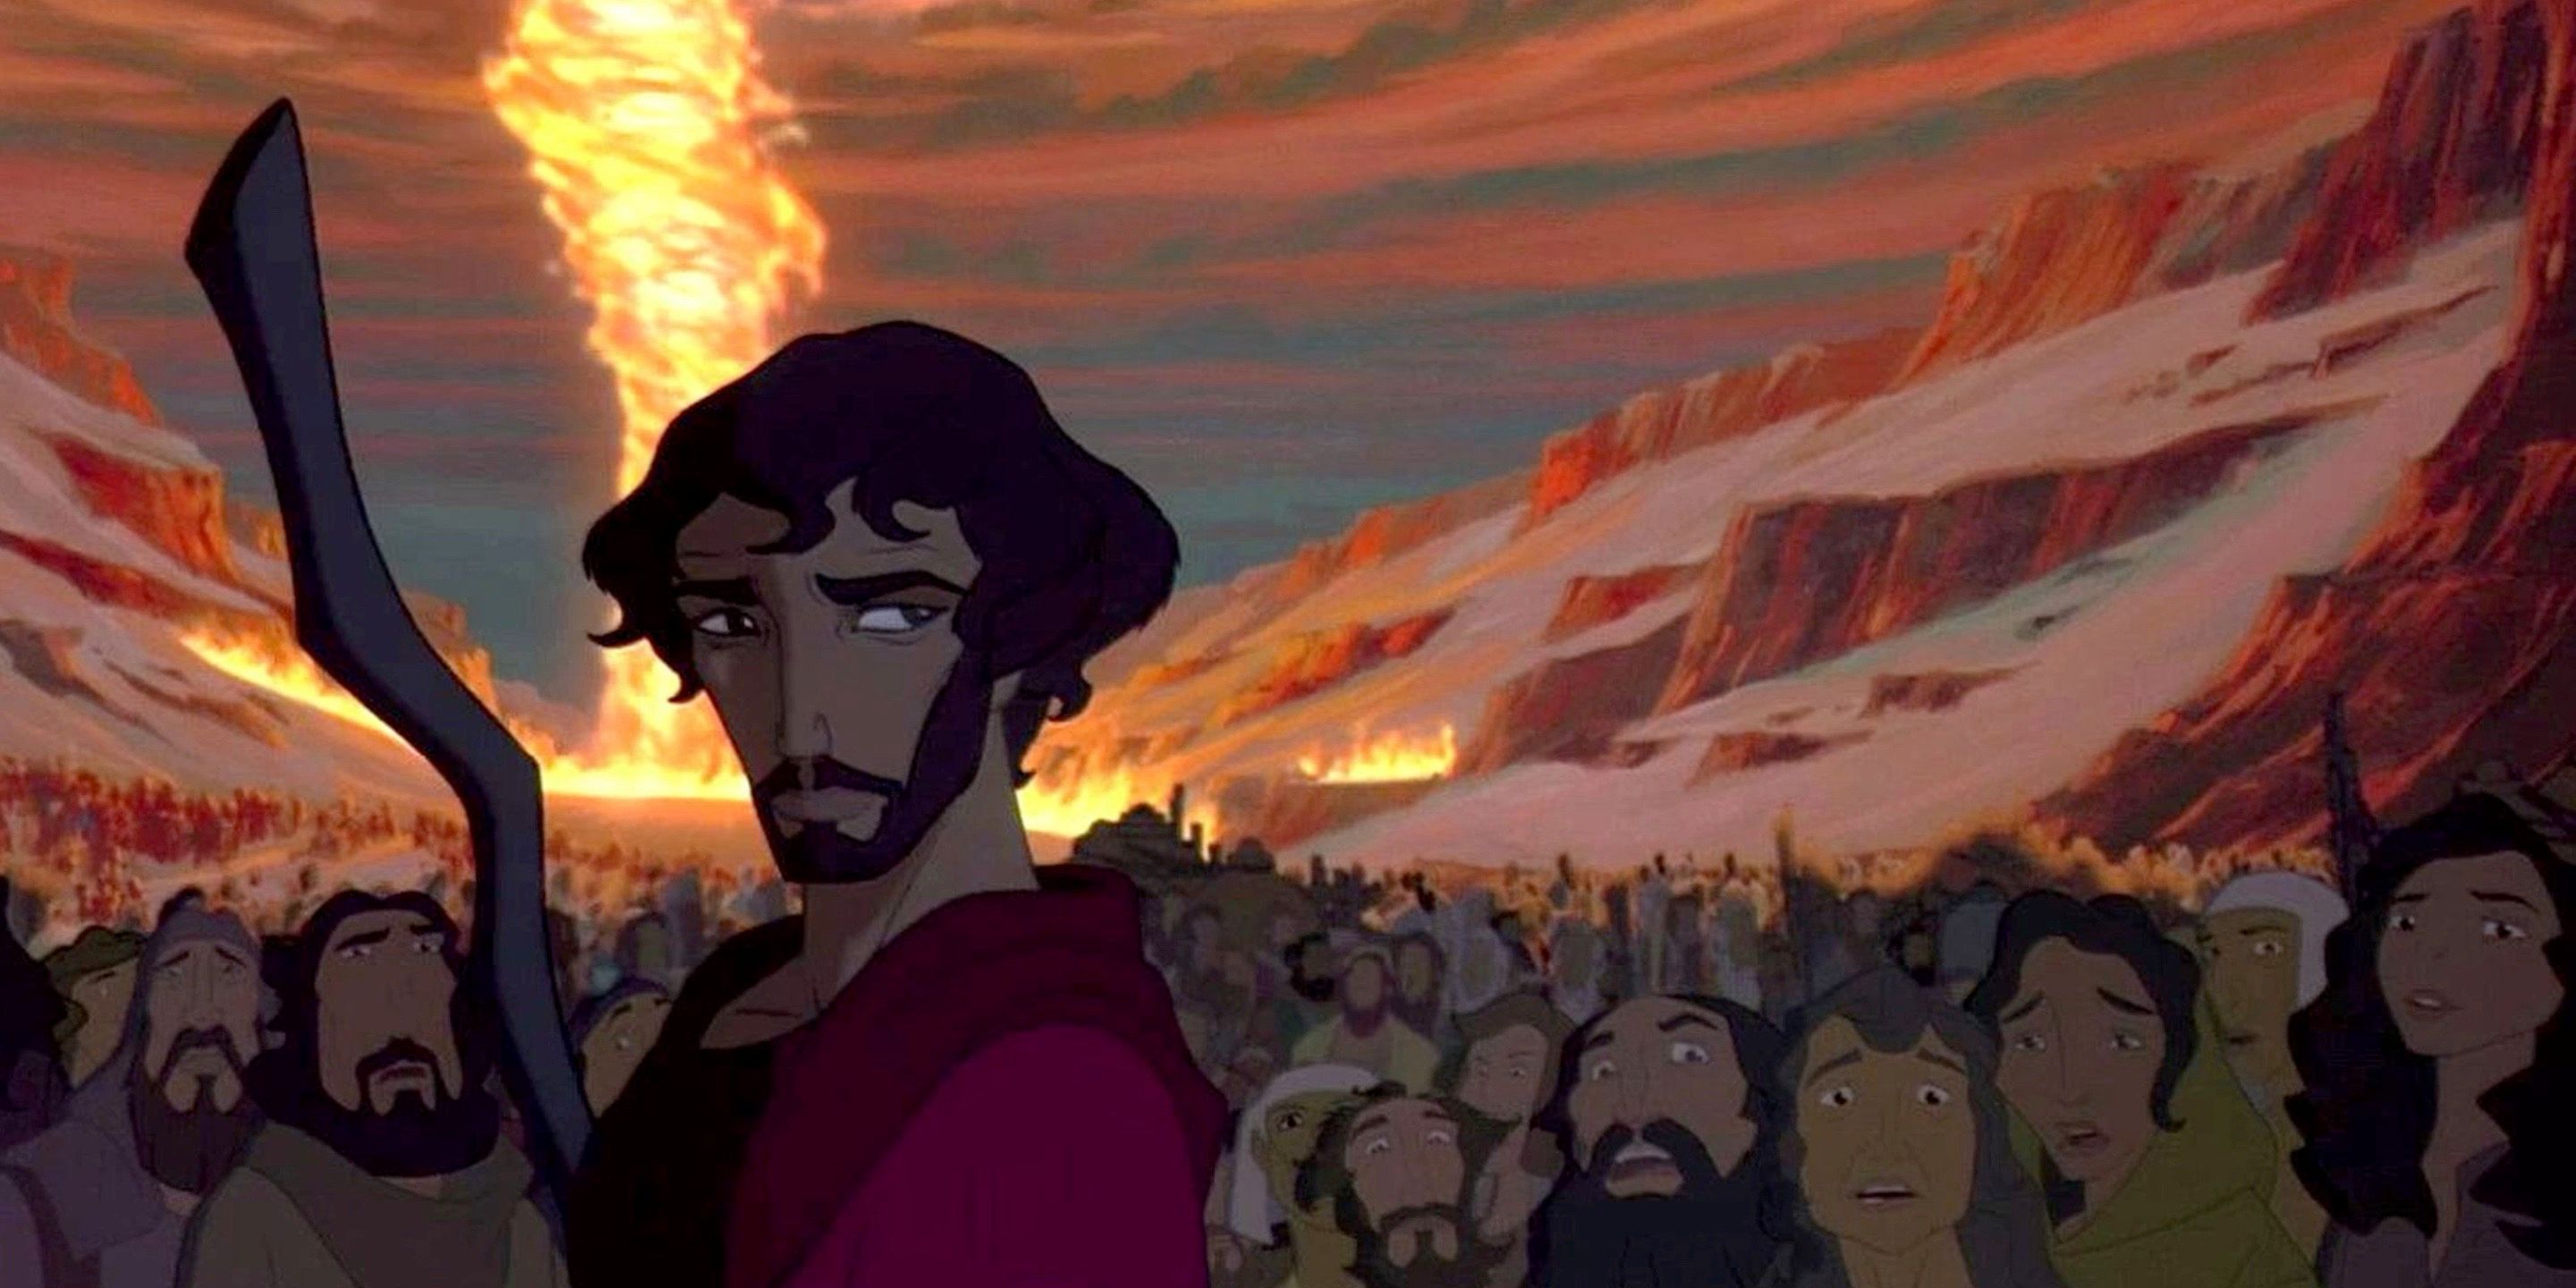 Moses in the king of Egypt